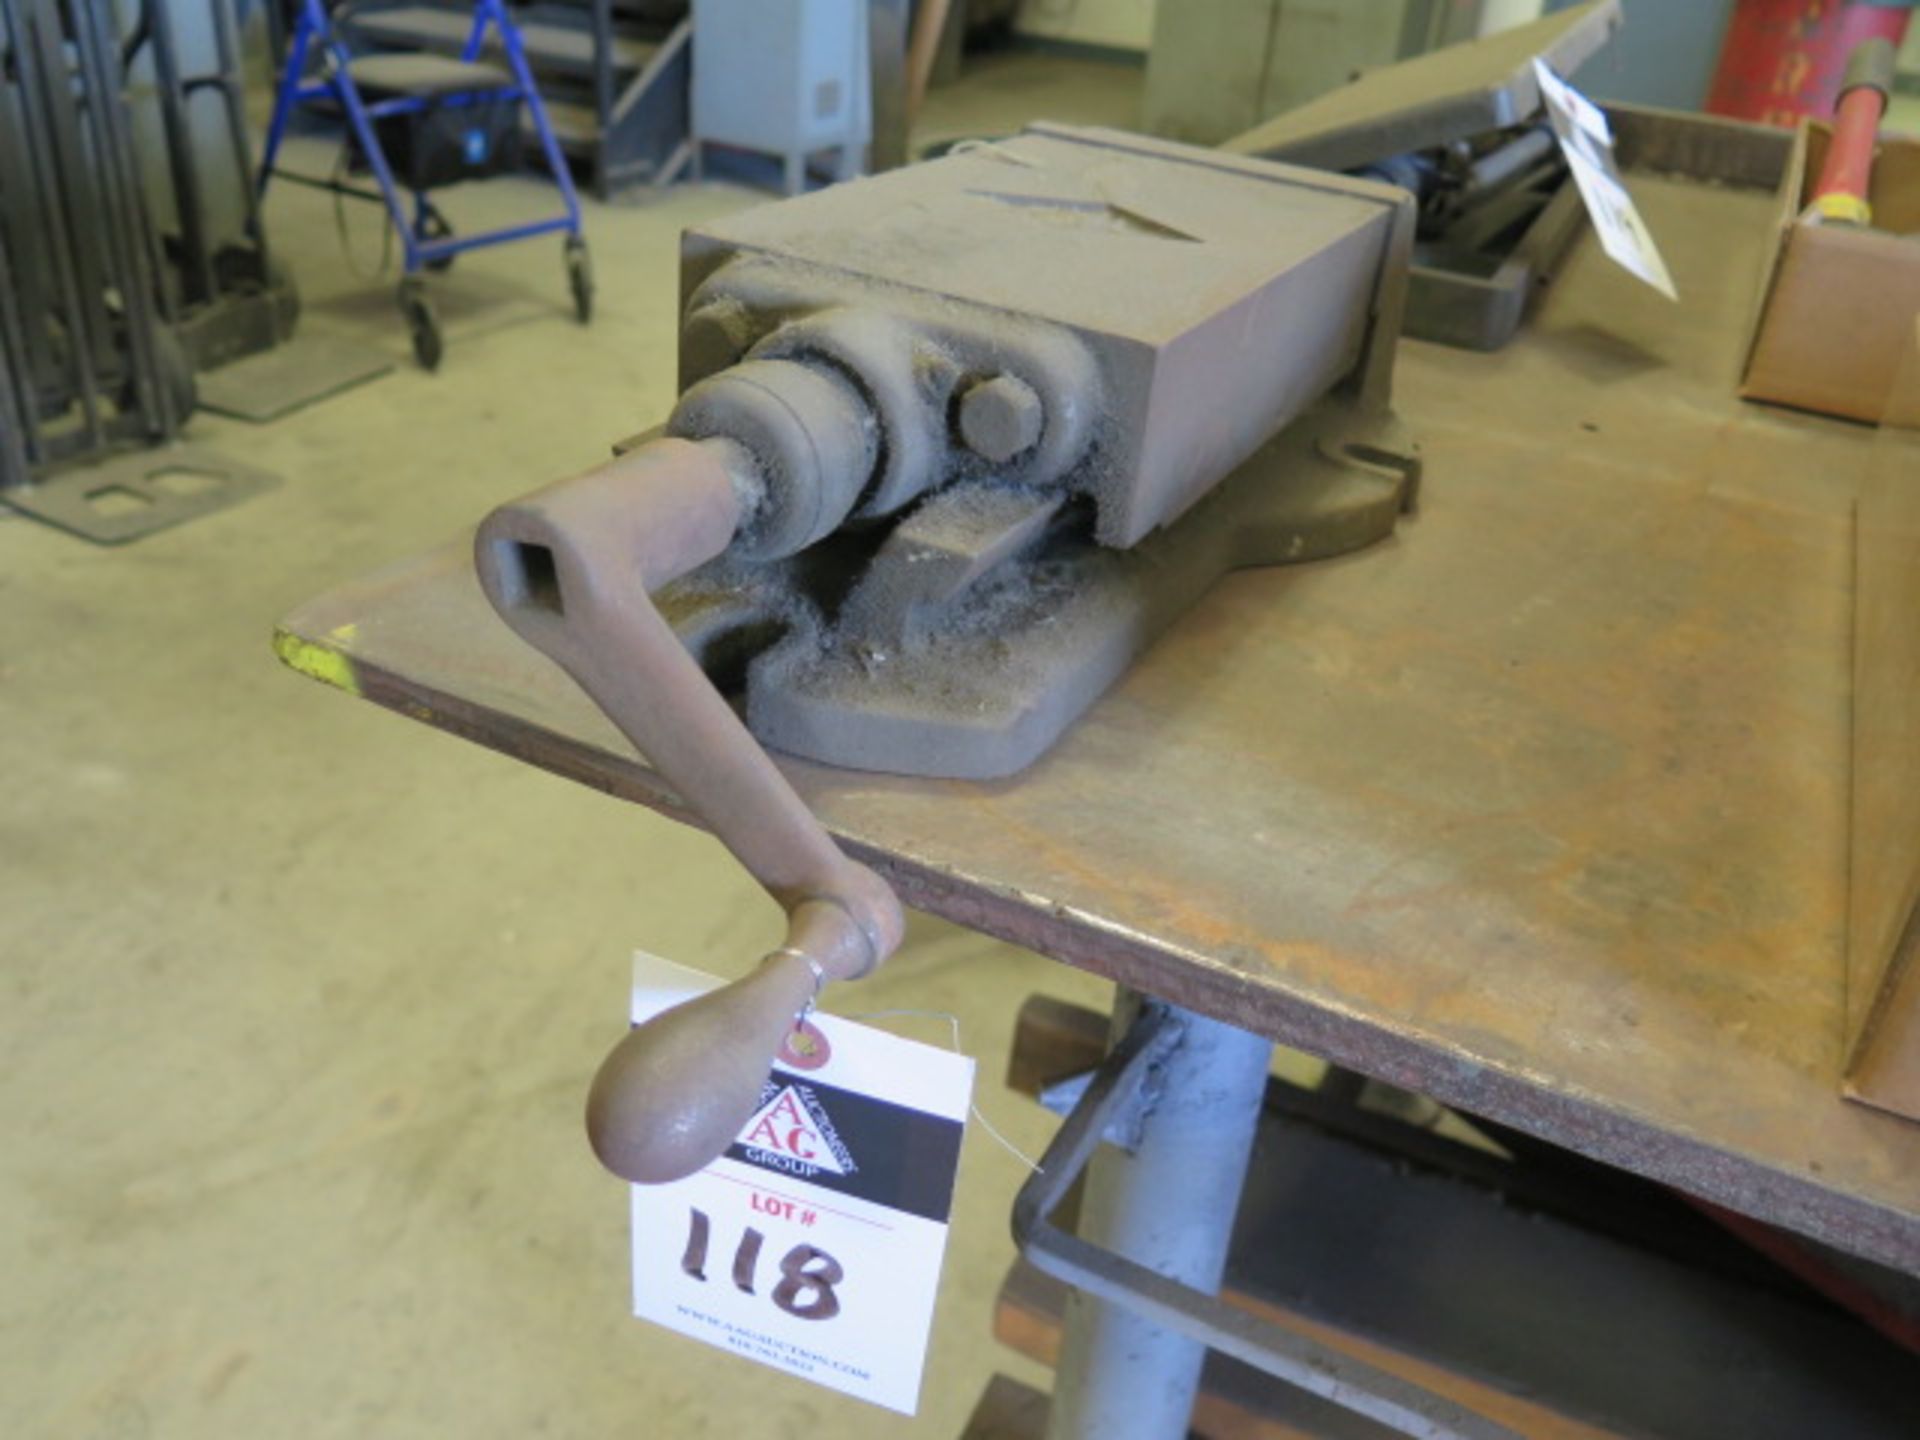 6" Machine Vise (SOLD AS-IS - NO WARRANTY)